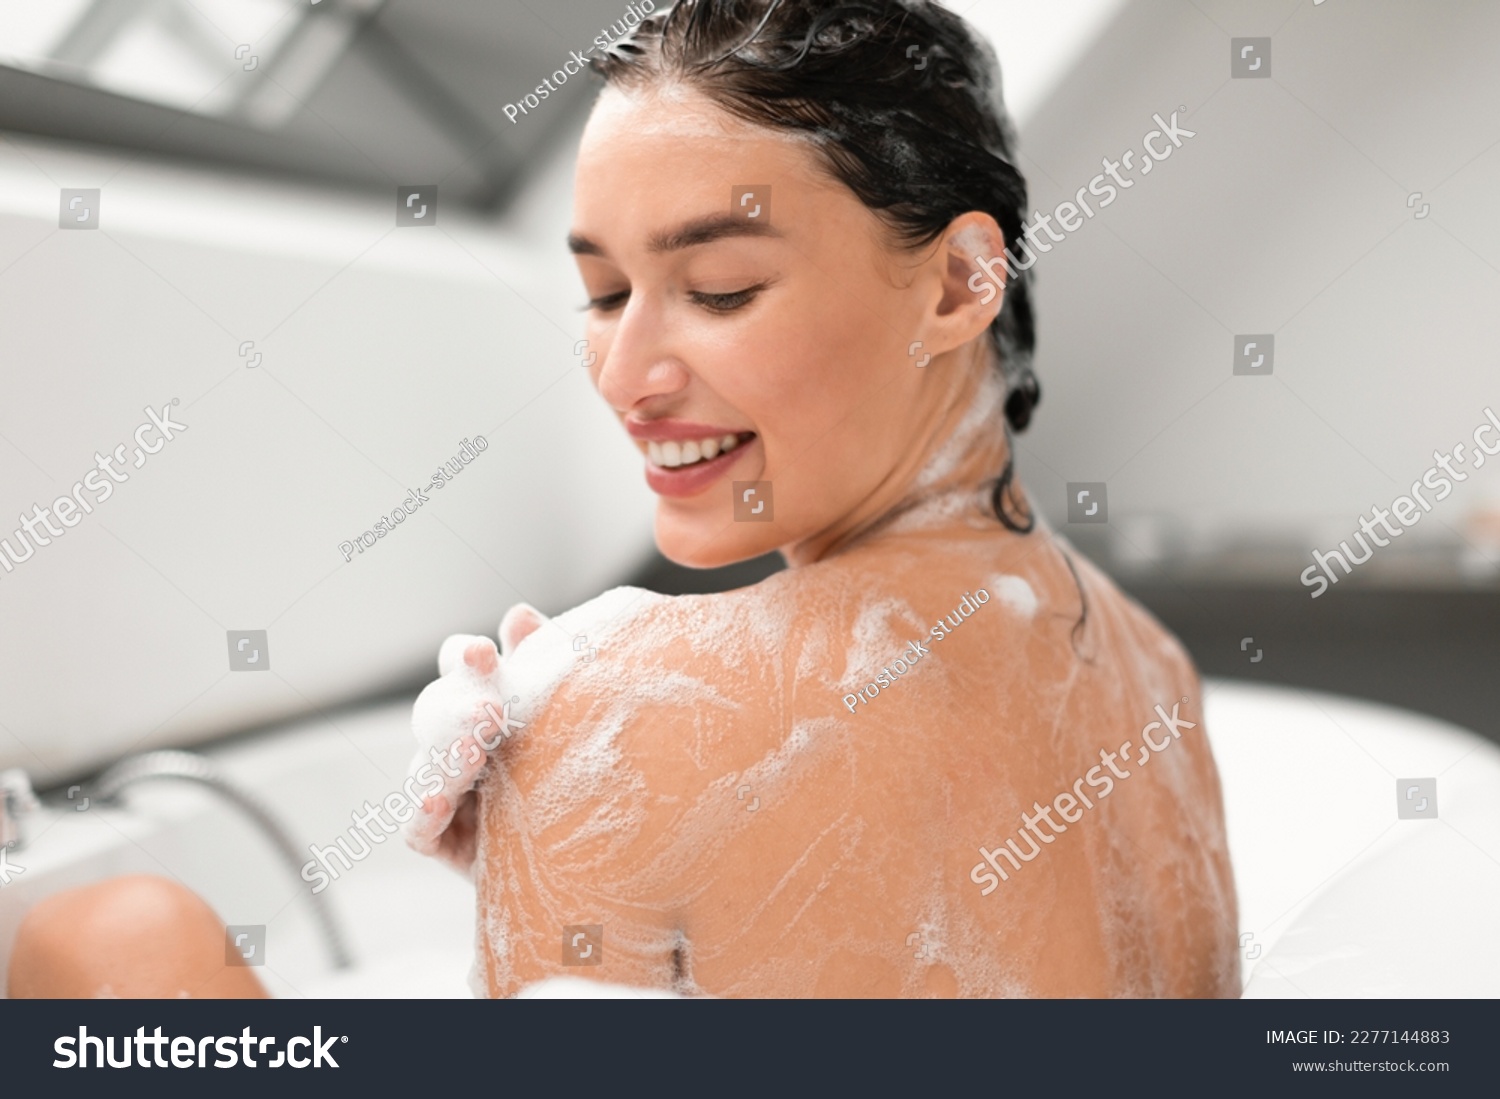 Pretty Woman Washing Body Taking Bath With Foam Applying Shower Gel On Shoulder Sitting Back To Camera In Bathtub In Modern Bathroom Indoors. Bodycare Beauty Routine Concept. Selective Focus #2277144883